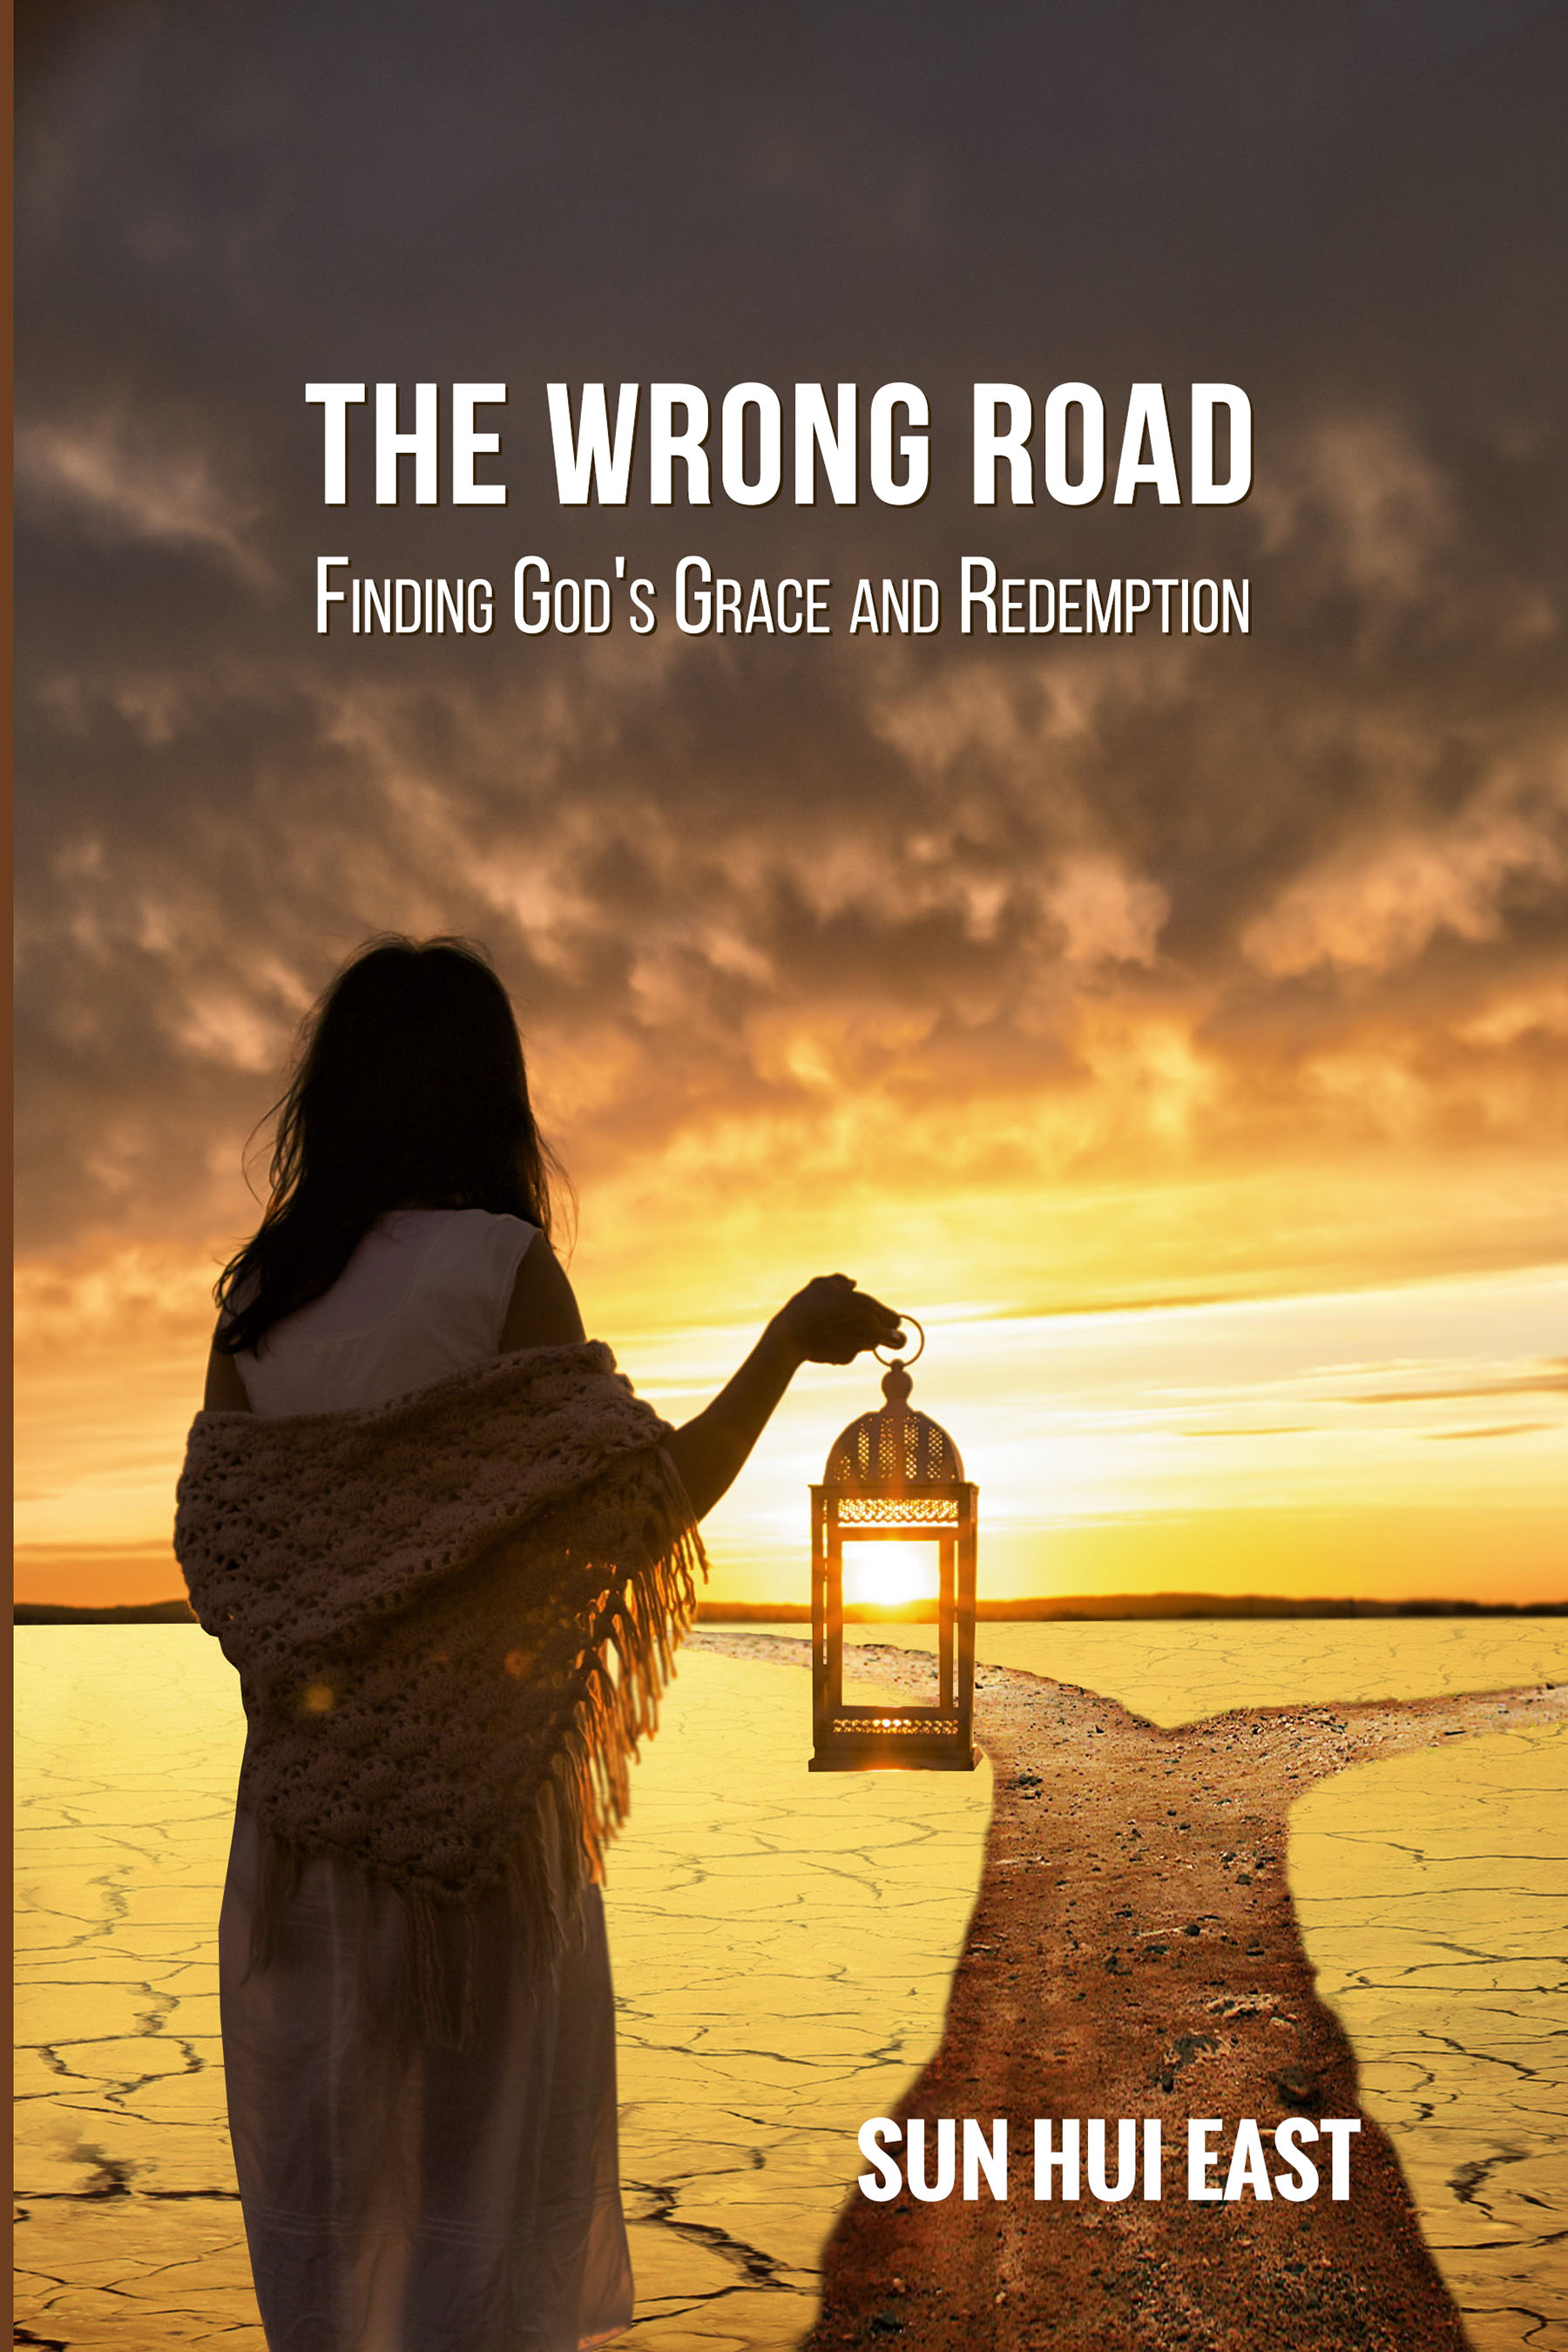 The Wrong Road: Finding God’s Grace and Redemption